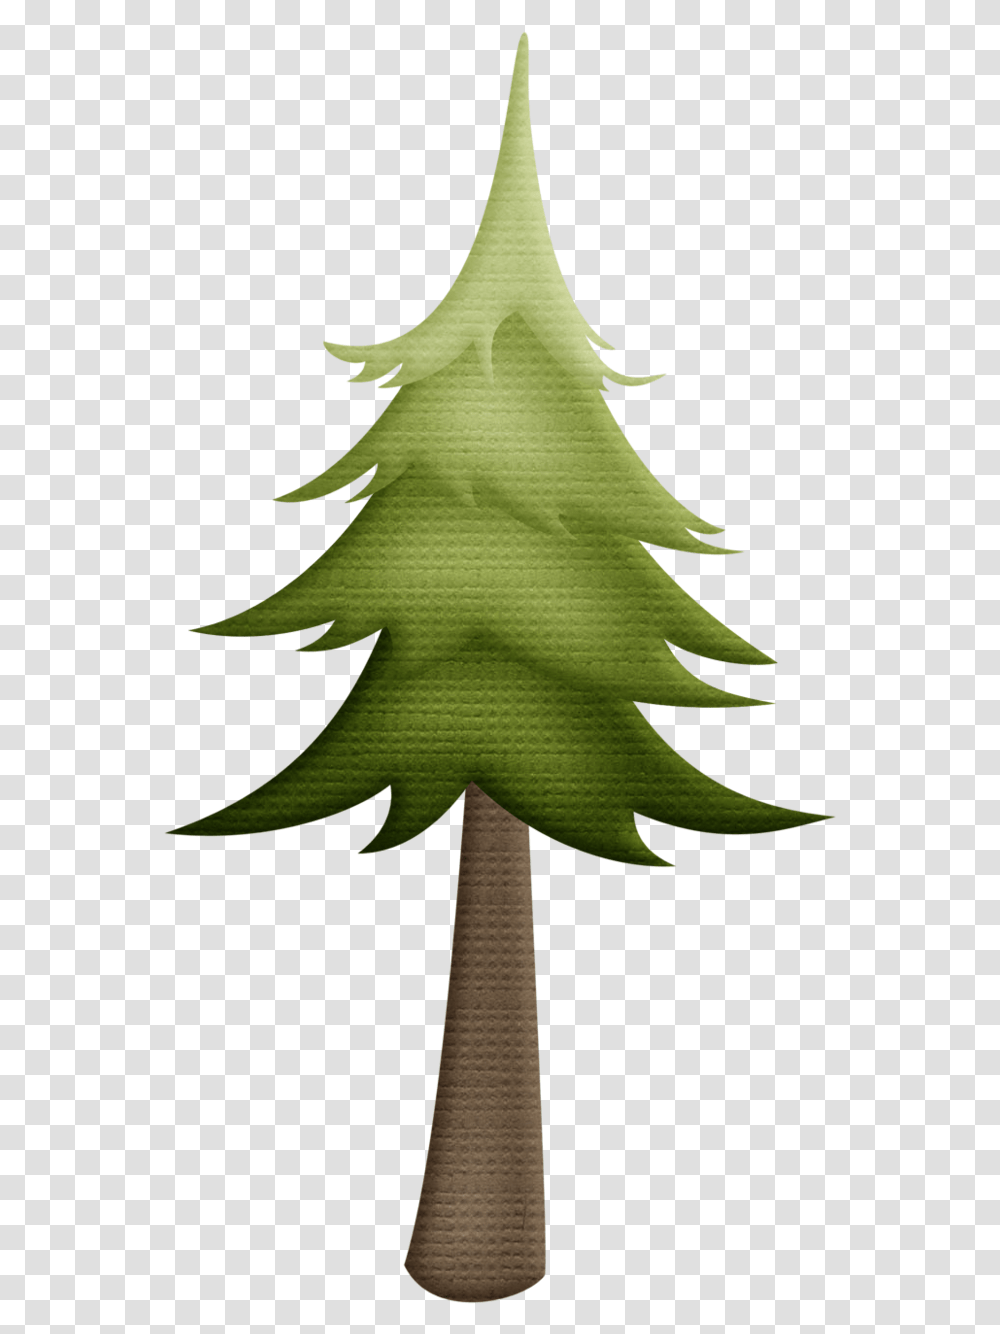 Trees U203fu2040•• Forest Christmas Tree Clipart Woodland Christmas Tree Clipart, Plant, Leaf, Ornament, Green Transparent Png